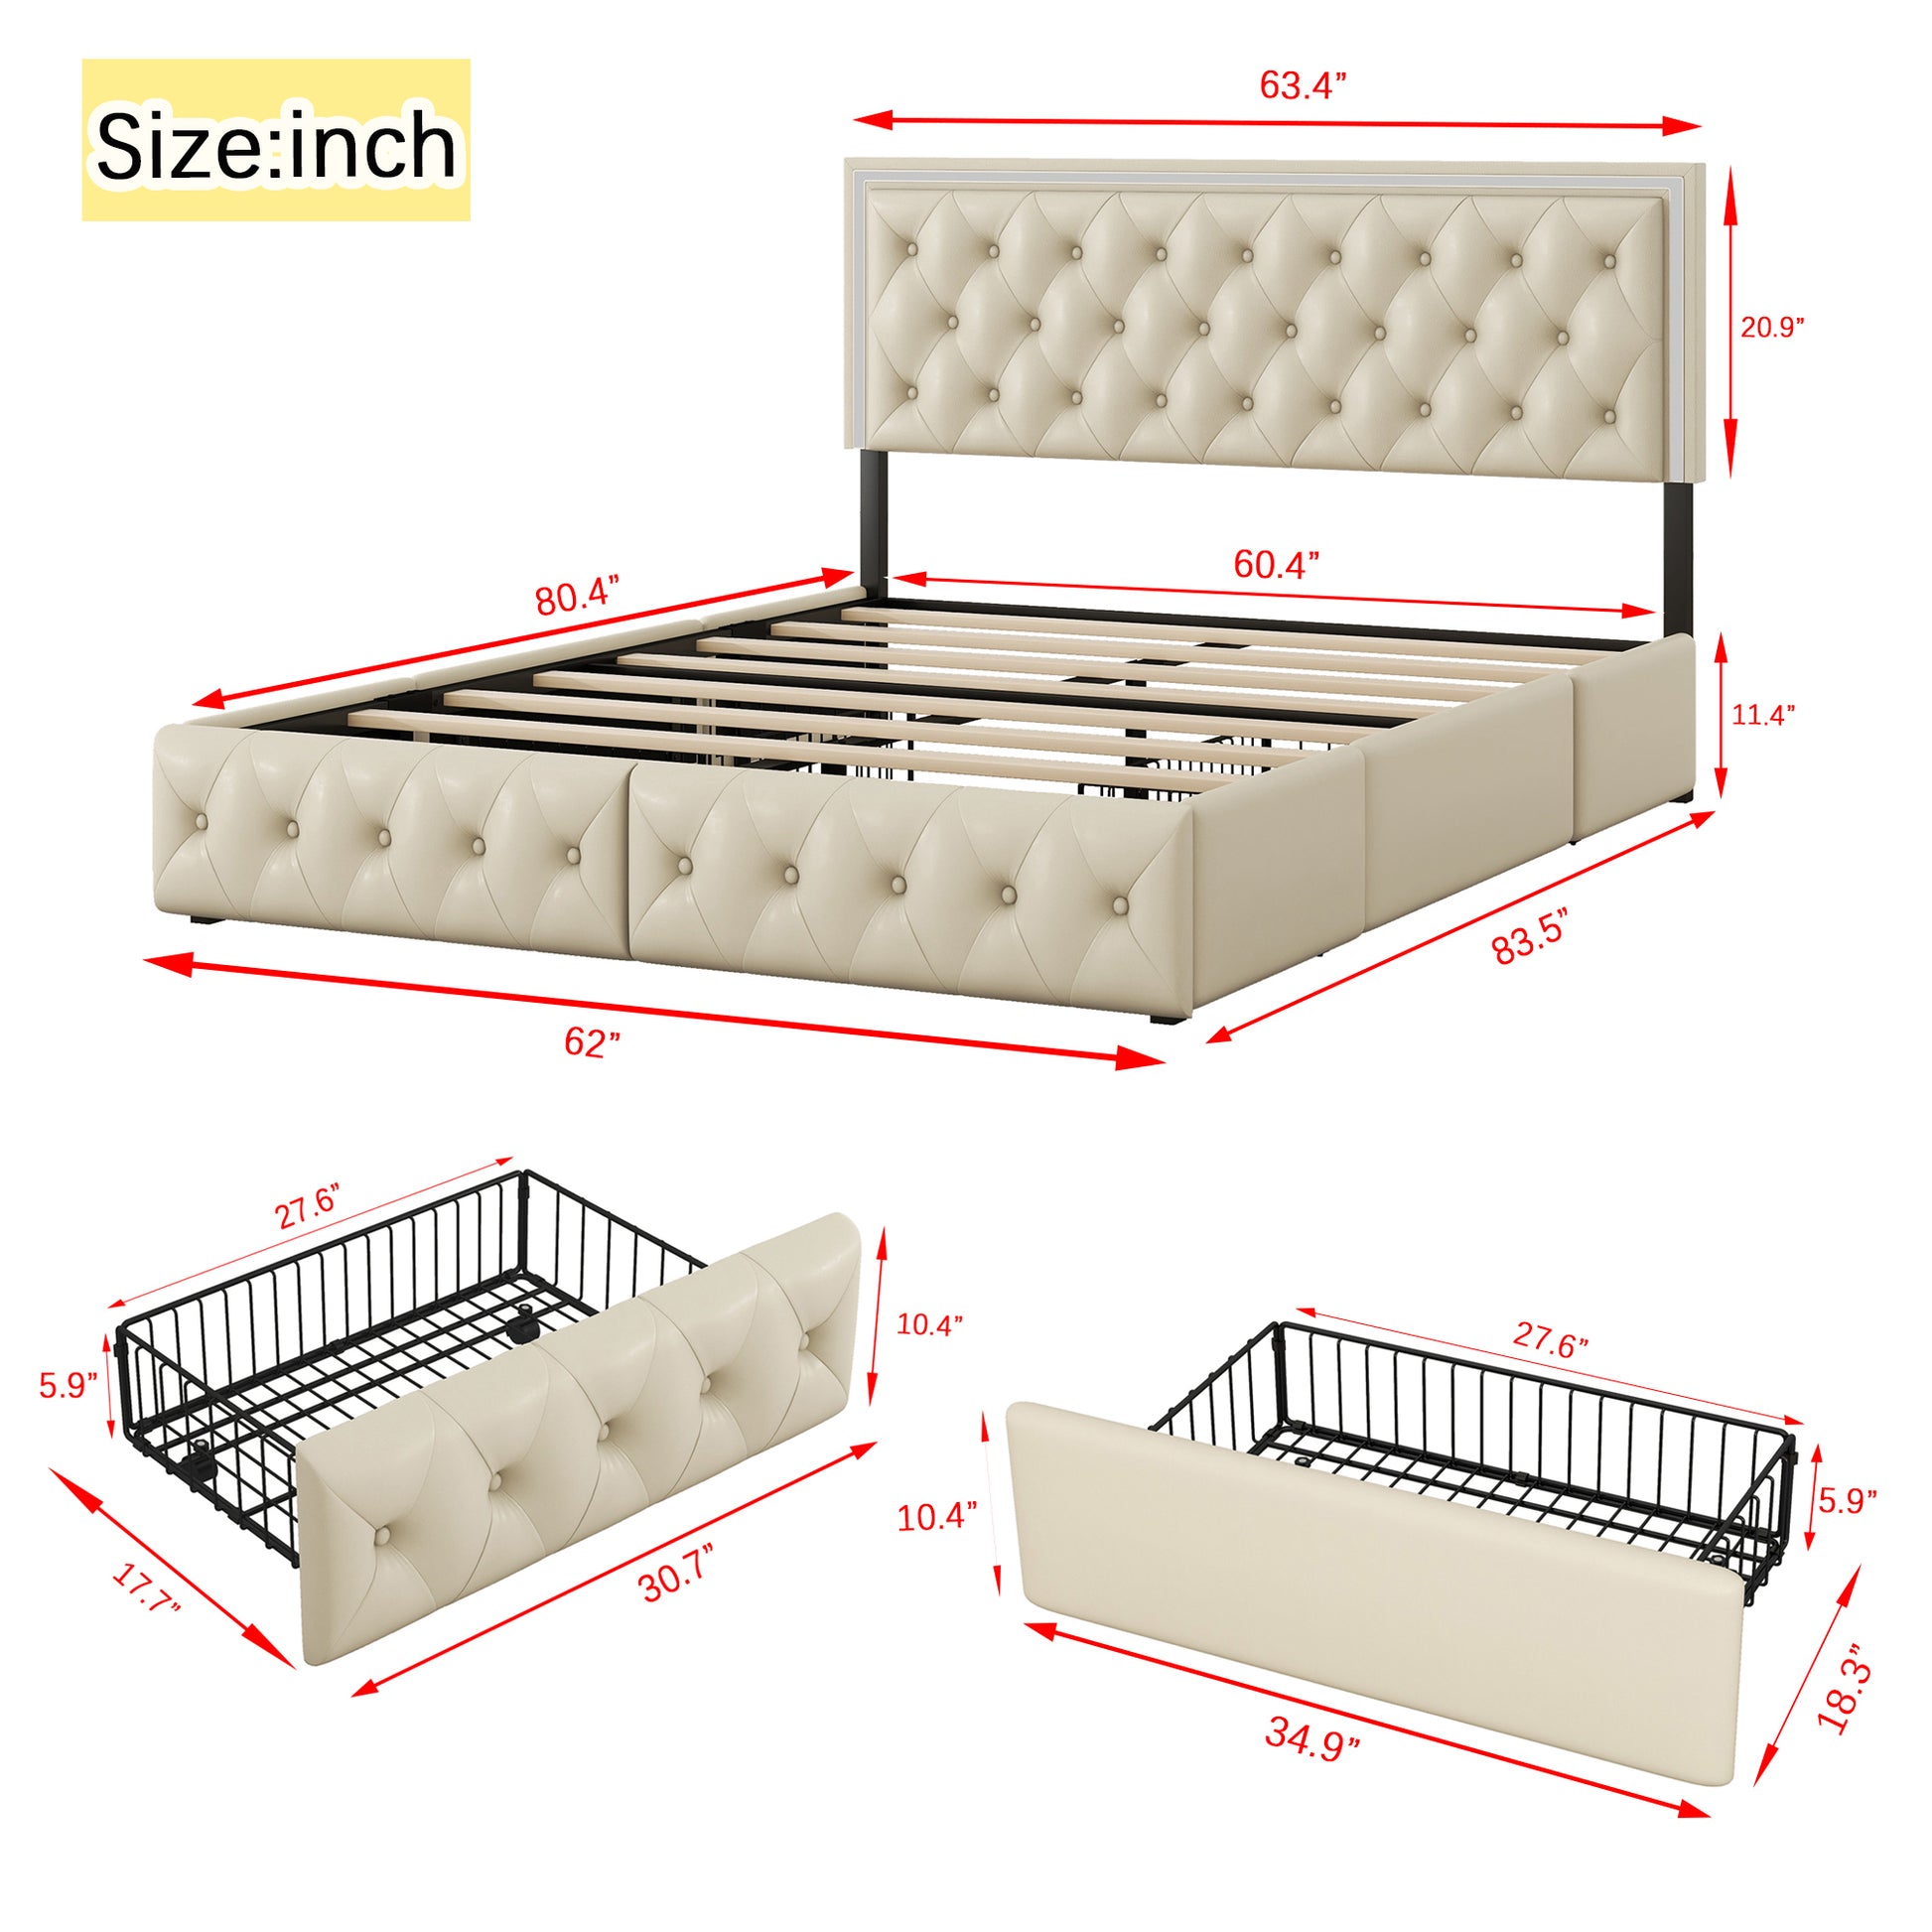 Queen Upholstered Bed Frame with 4 Storage Drawers, PU Leather Platform Bed with LED Headboard, No Box Spring Needed, Beige - Enova Luxe Home Store